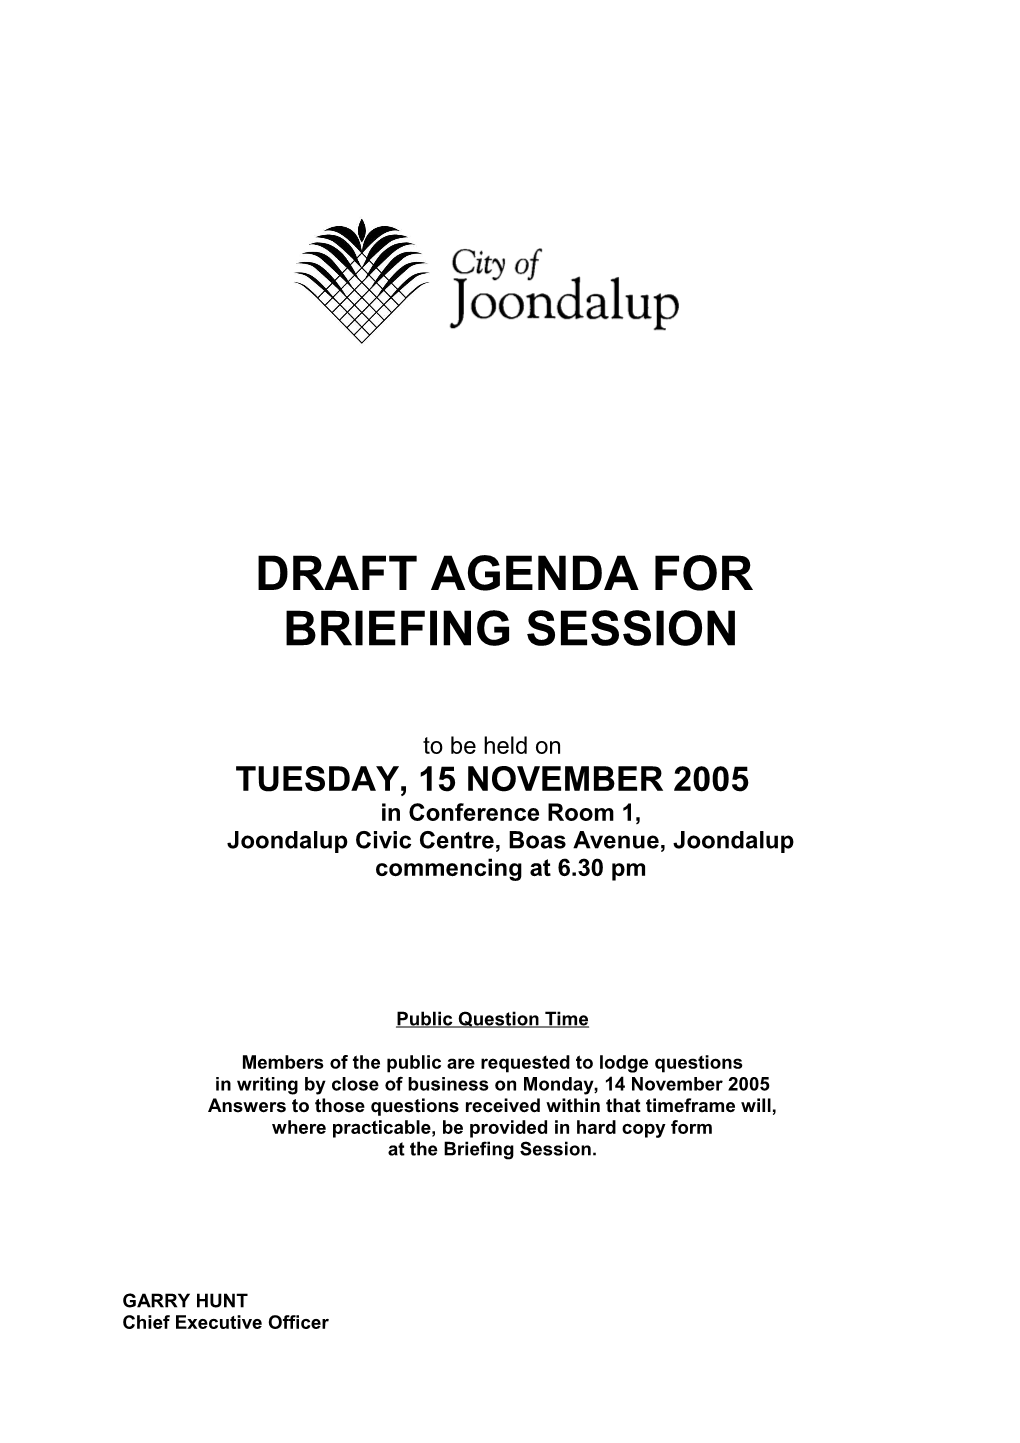 City of Joondalup - Agenda for Meeting of Council - 24.11.98